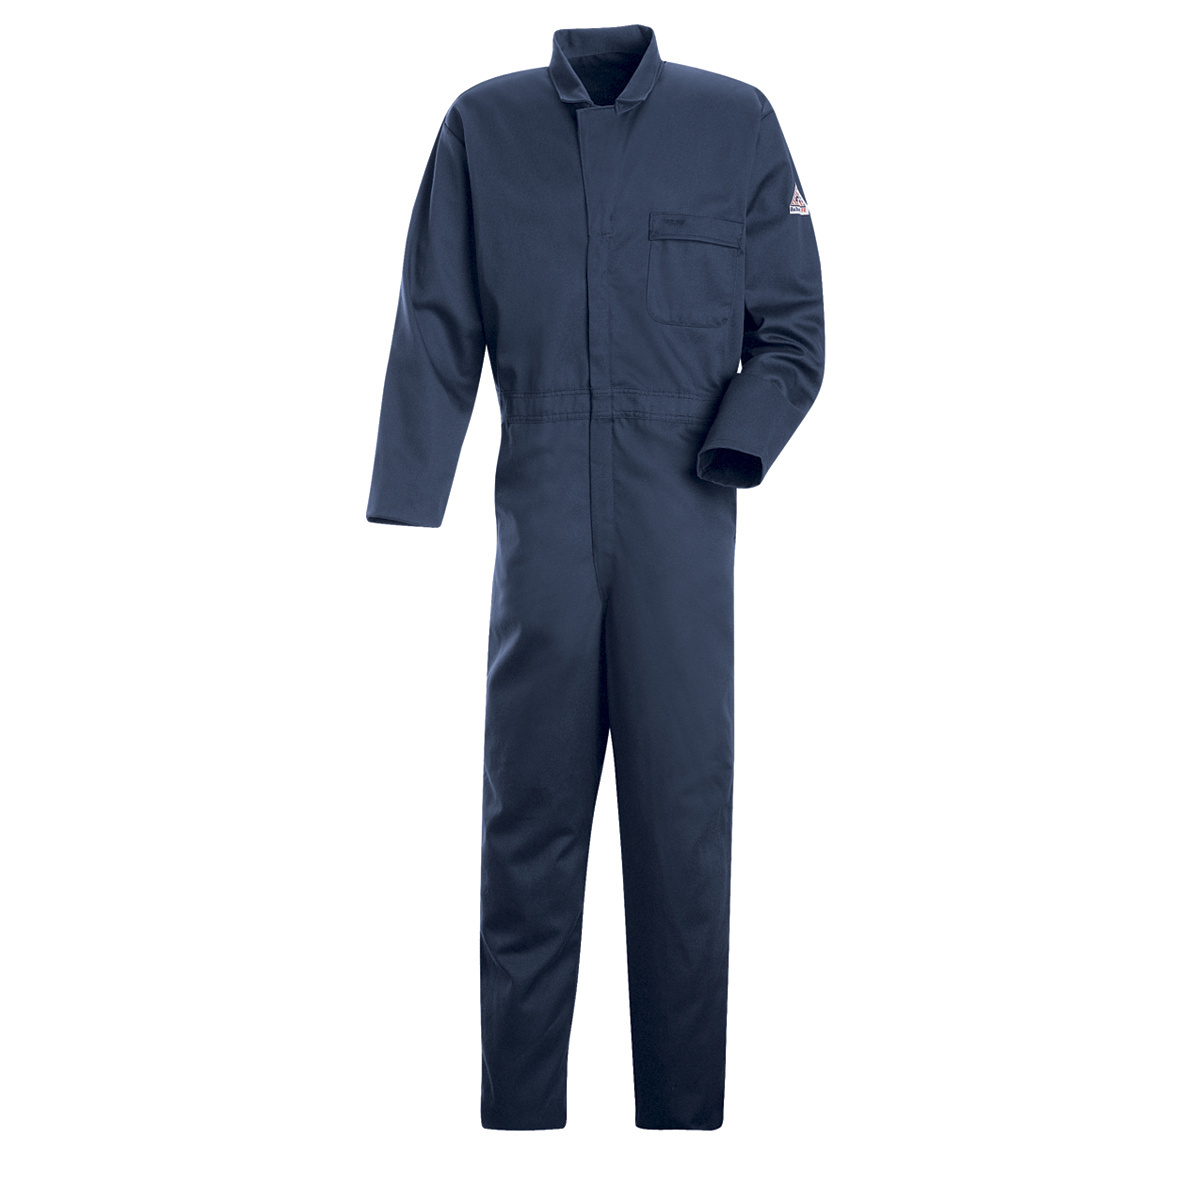 Bulwark® Small| Regular Navy Blue EXCEL FR® Twill Cotton Flame Resistant Coveralls With Zipper Front Closure